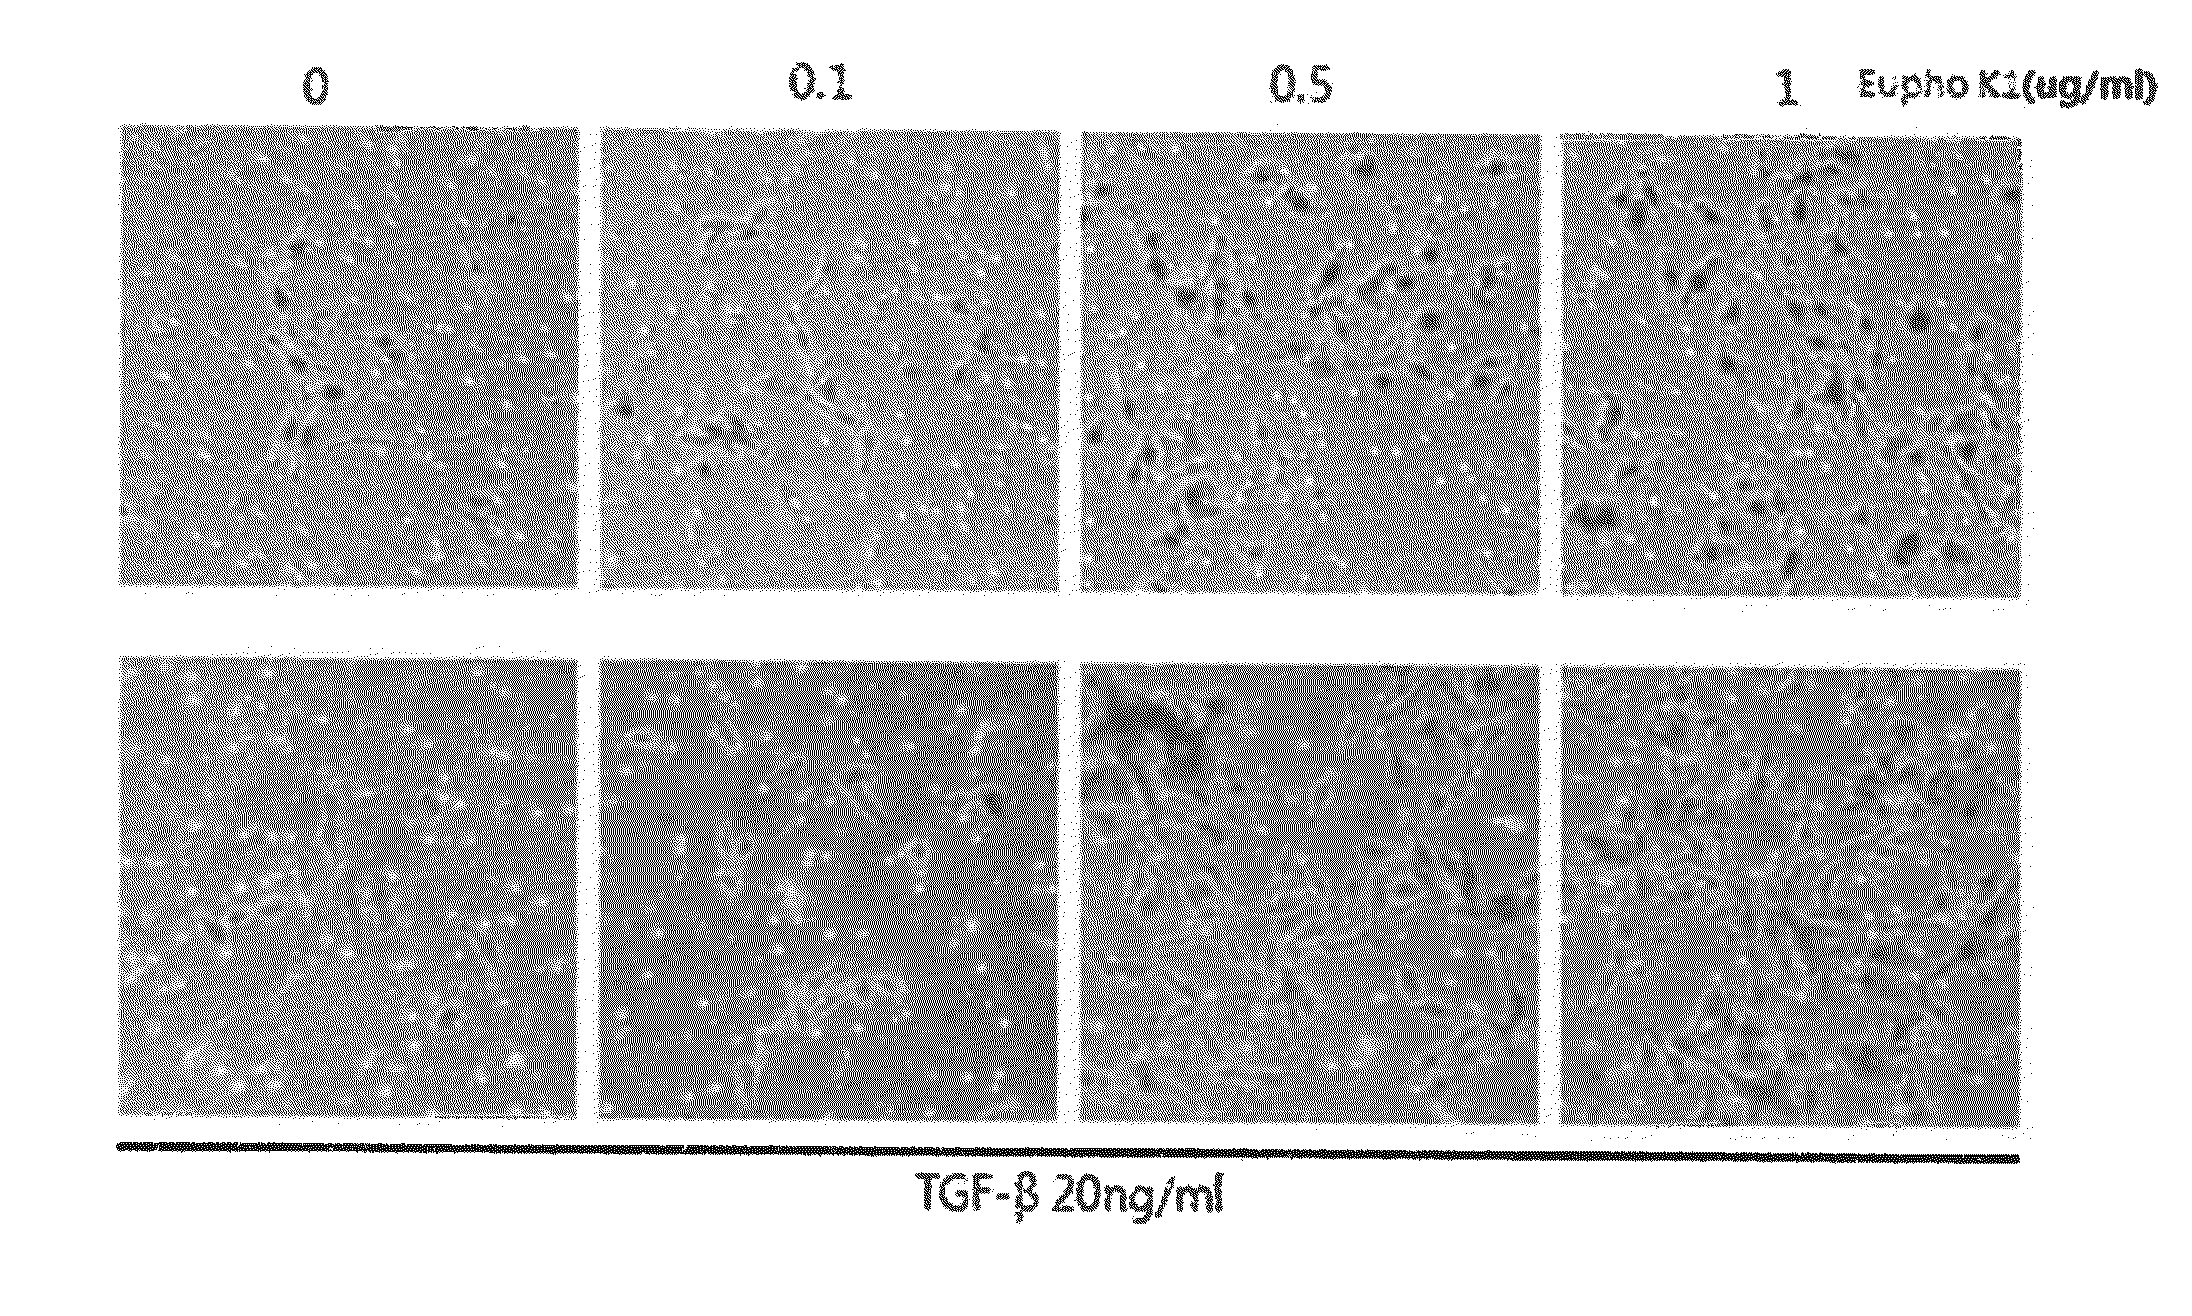 Pharmaceutical composition for treating wounds or revitalizing skin comprising euphorbia kansui extracts, fractions thereof or diterpene compounds separated from the fractions as active ingredient